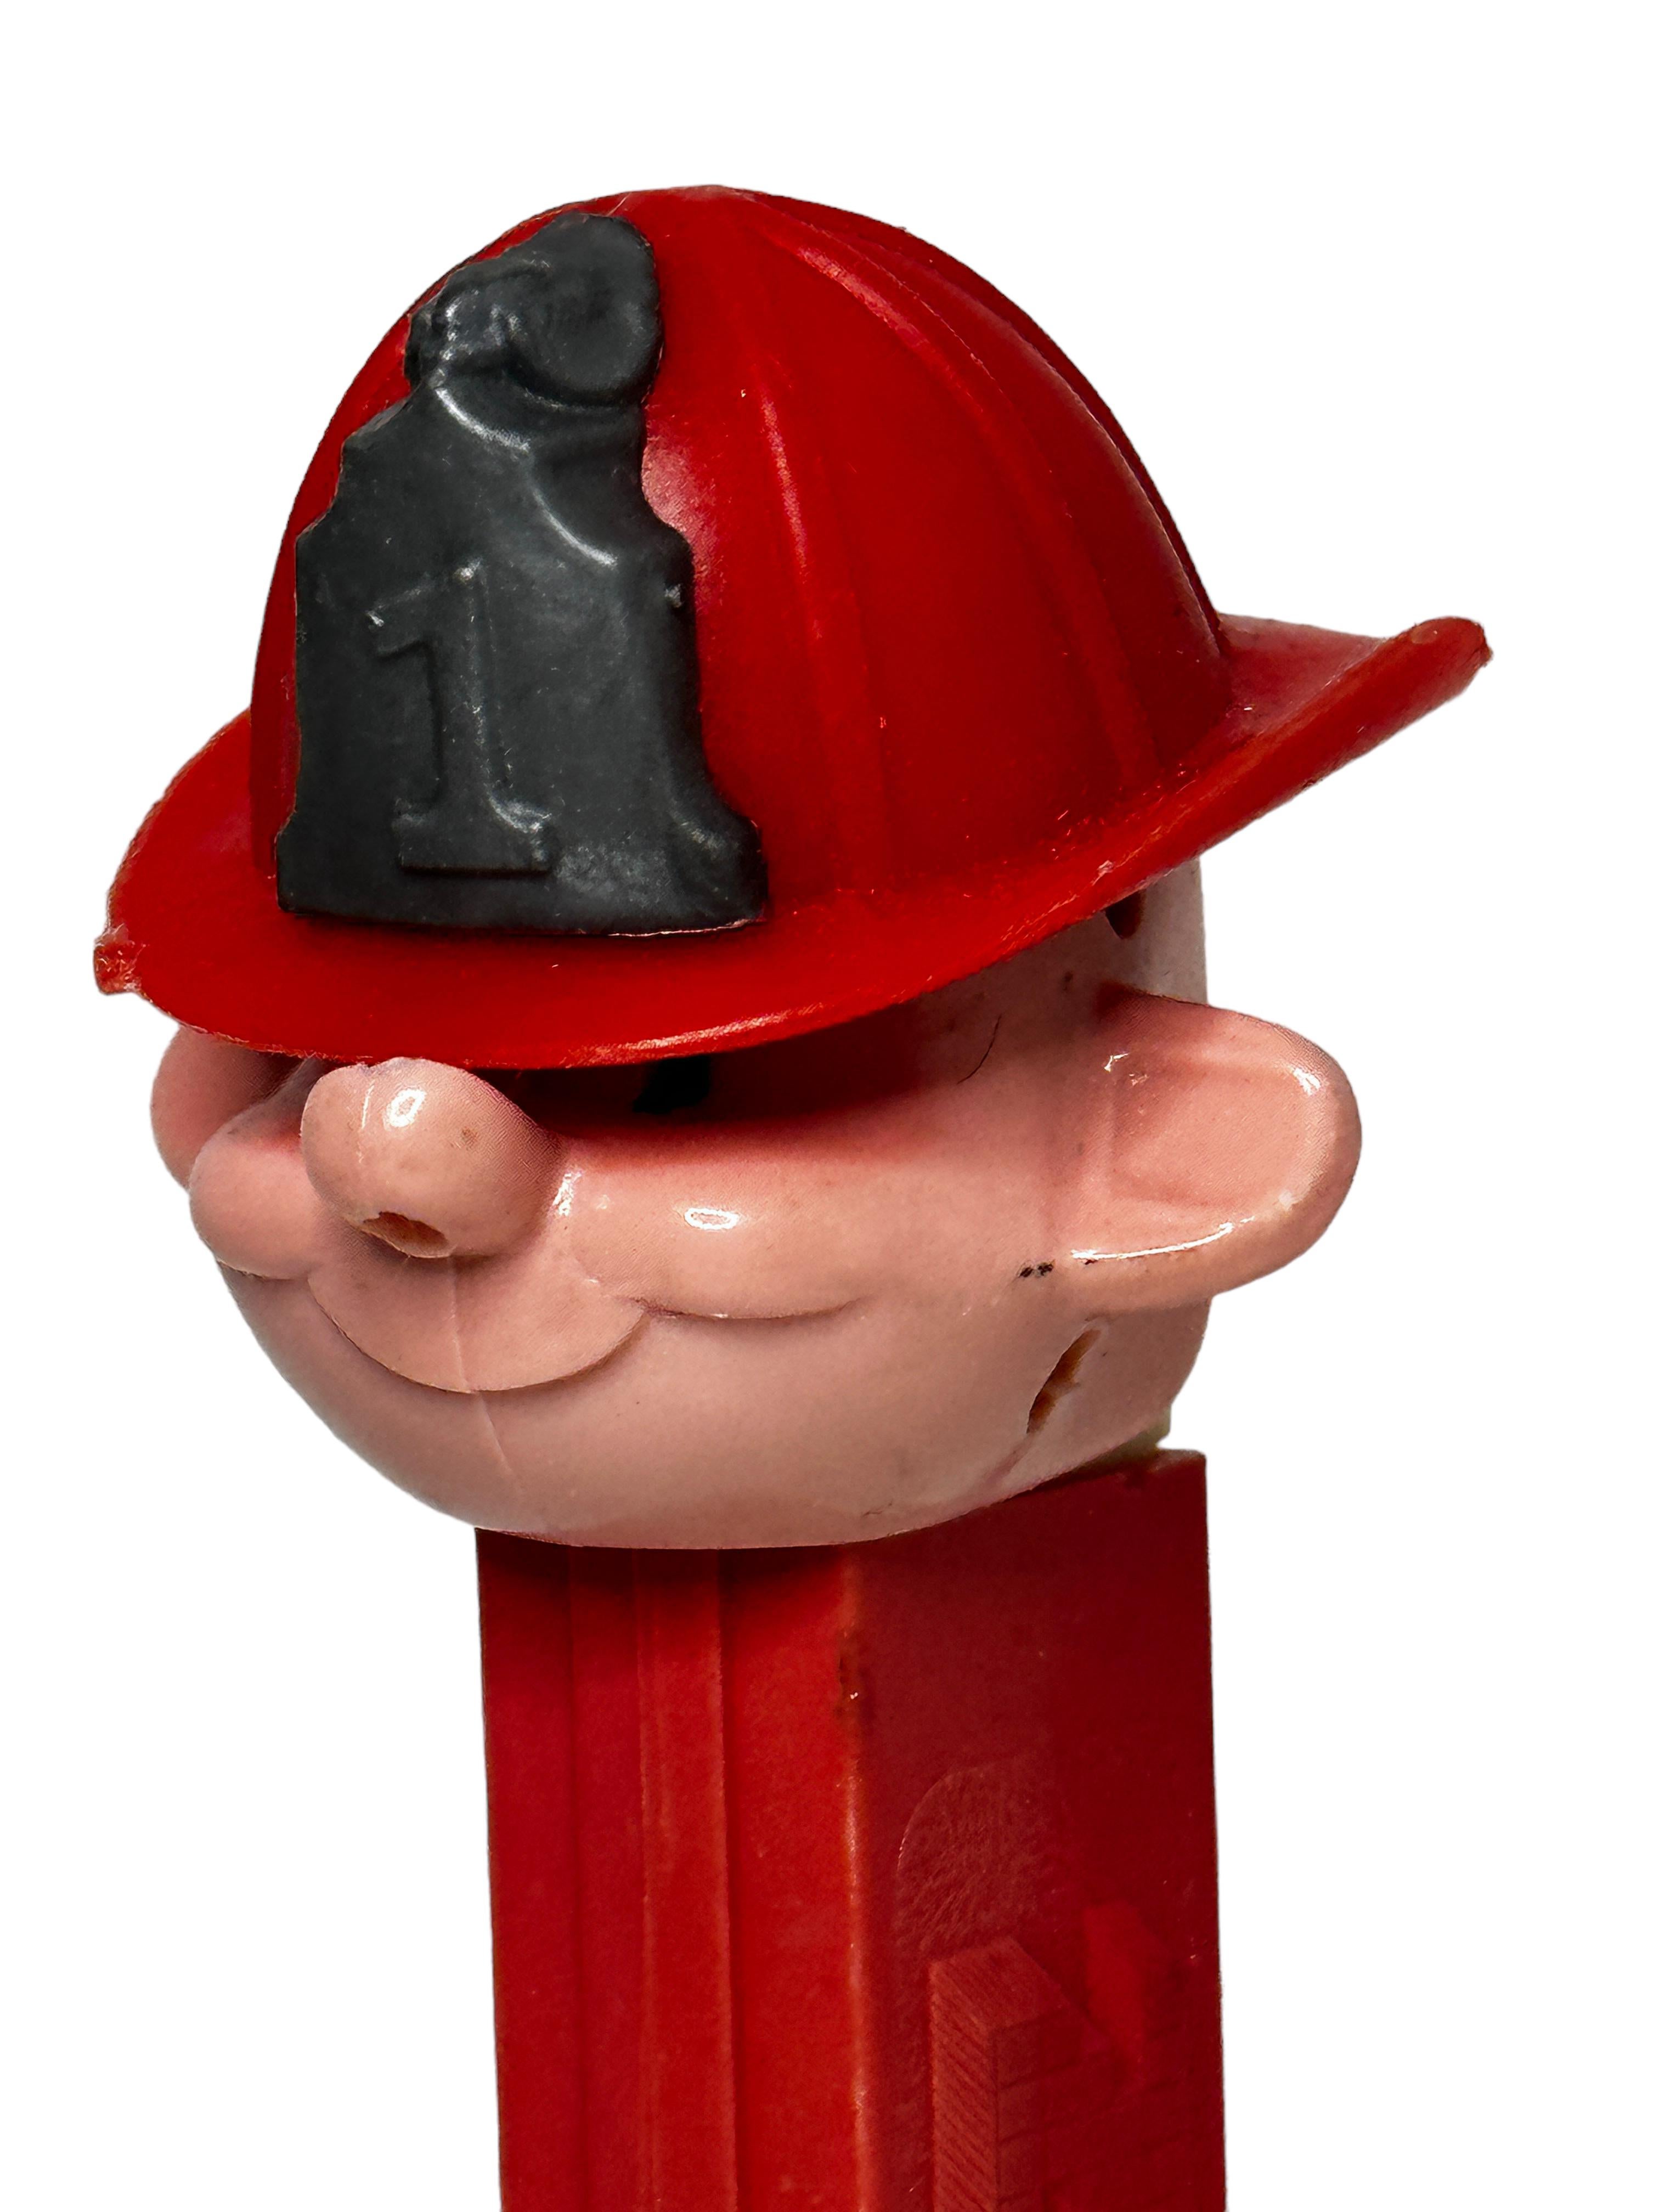 Late 20th Century 1970s Vintage Red Pez Fireman Candy Dispenser U.S, Pat. 3.410.455 No Feet For Sale